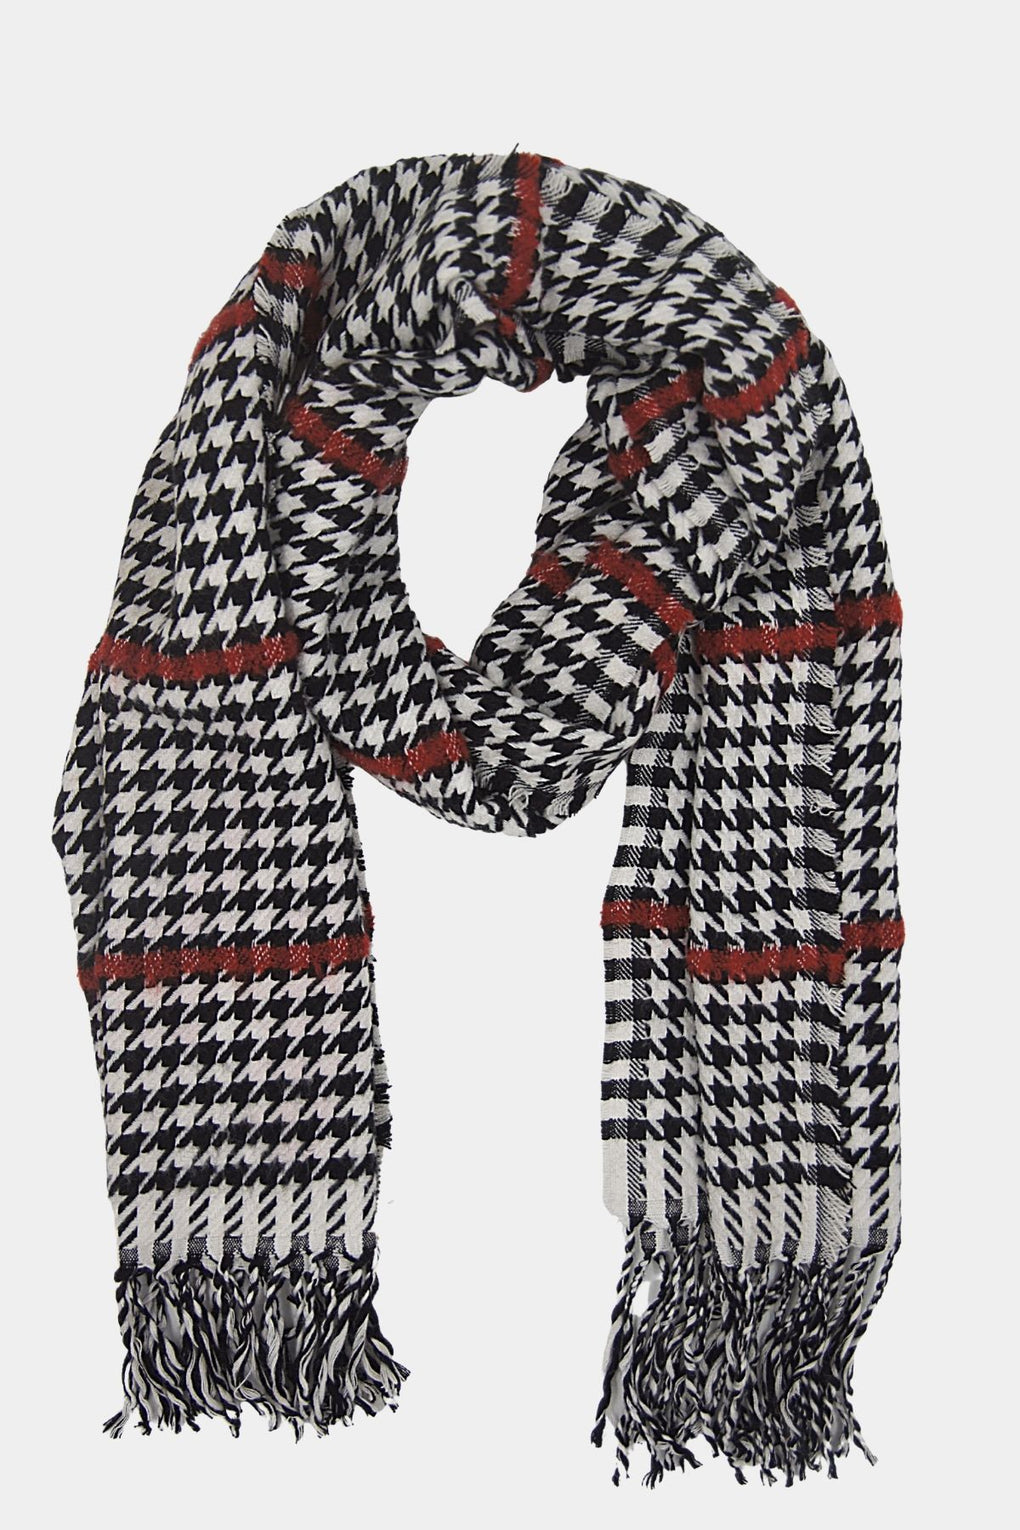 Black And White Houndstooth With Solid Stripes Scarf (SE-2141_Red)